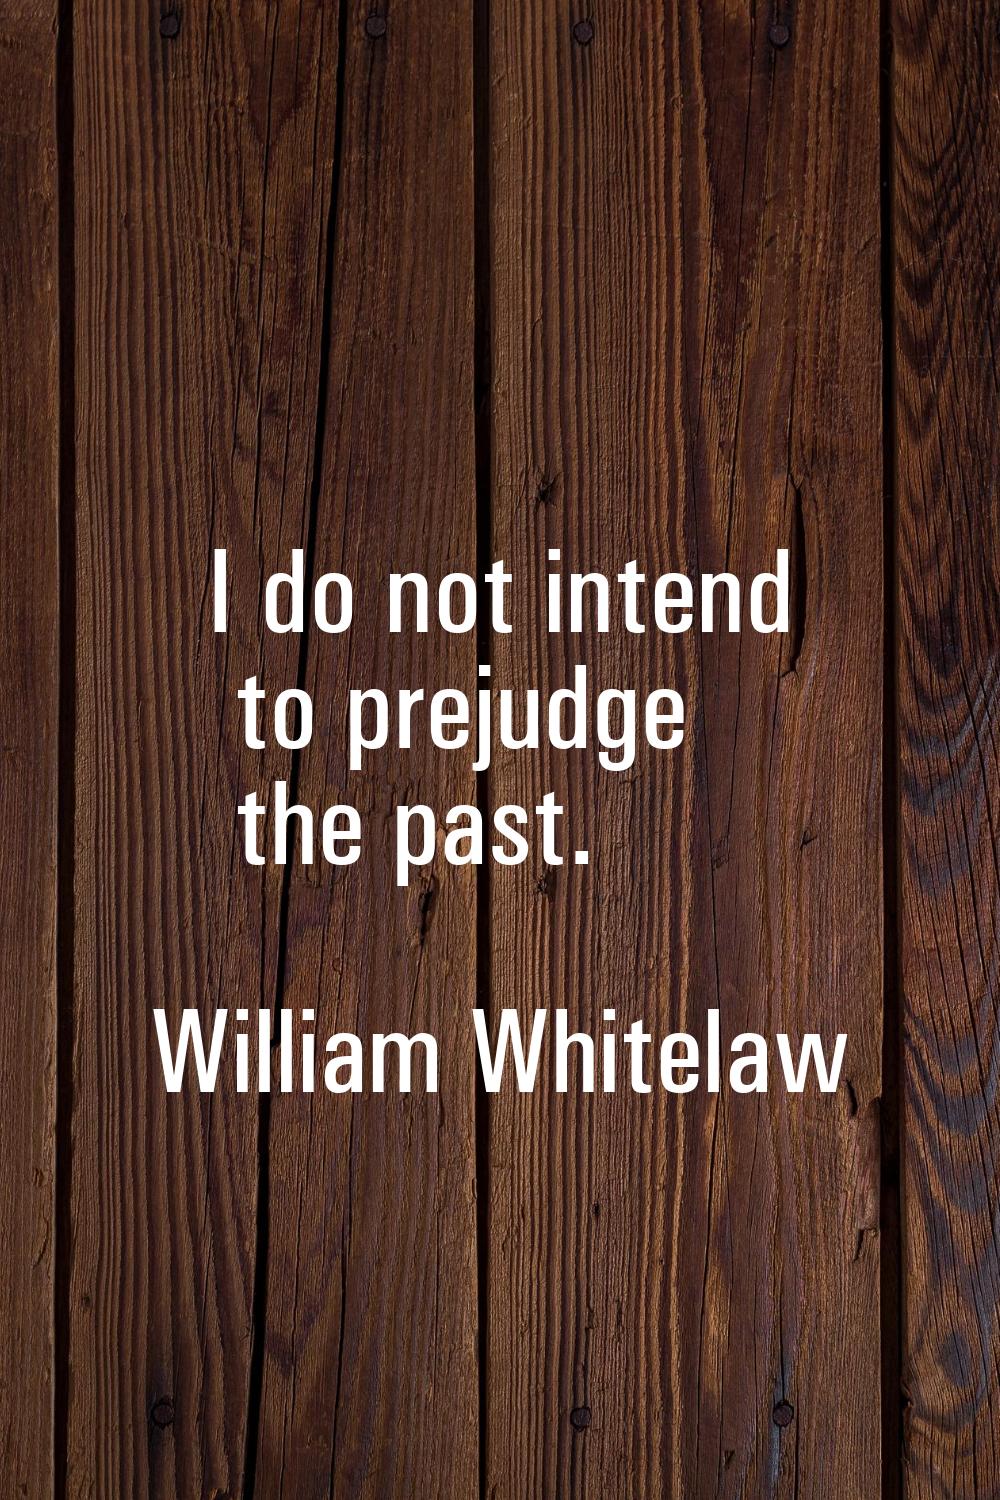 I do not intend to prejudge the past.